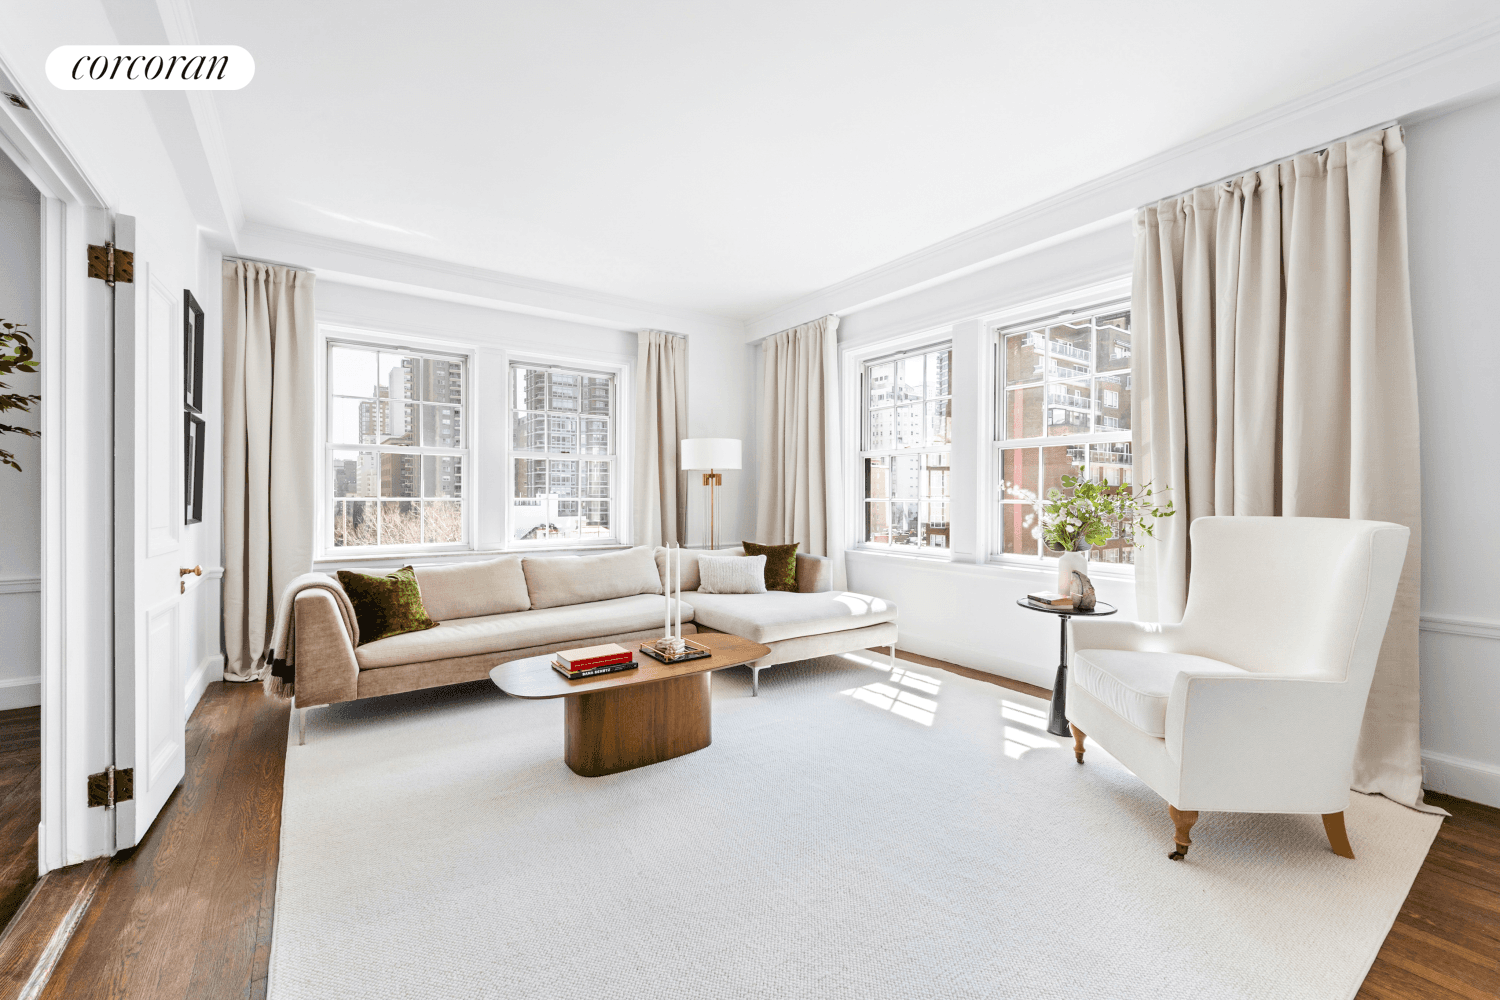 Rarely available, high floor 5 bedroom apartment in an exclusive white glove building on a beautiful tree lined street on the Upper East Side.